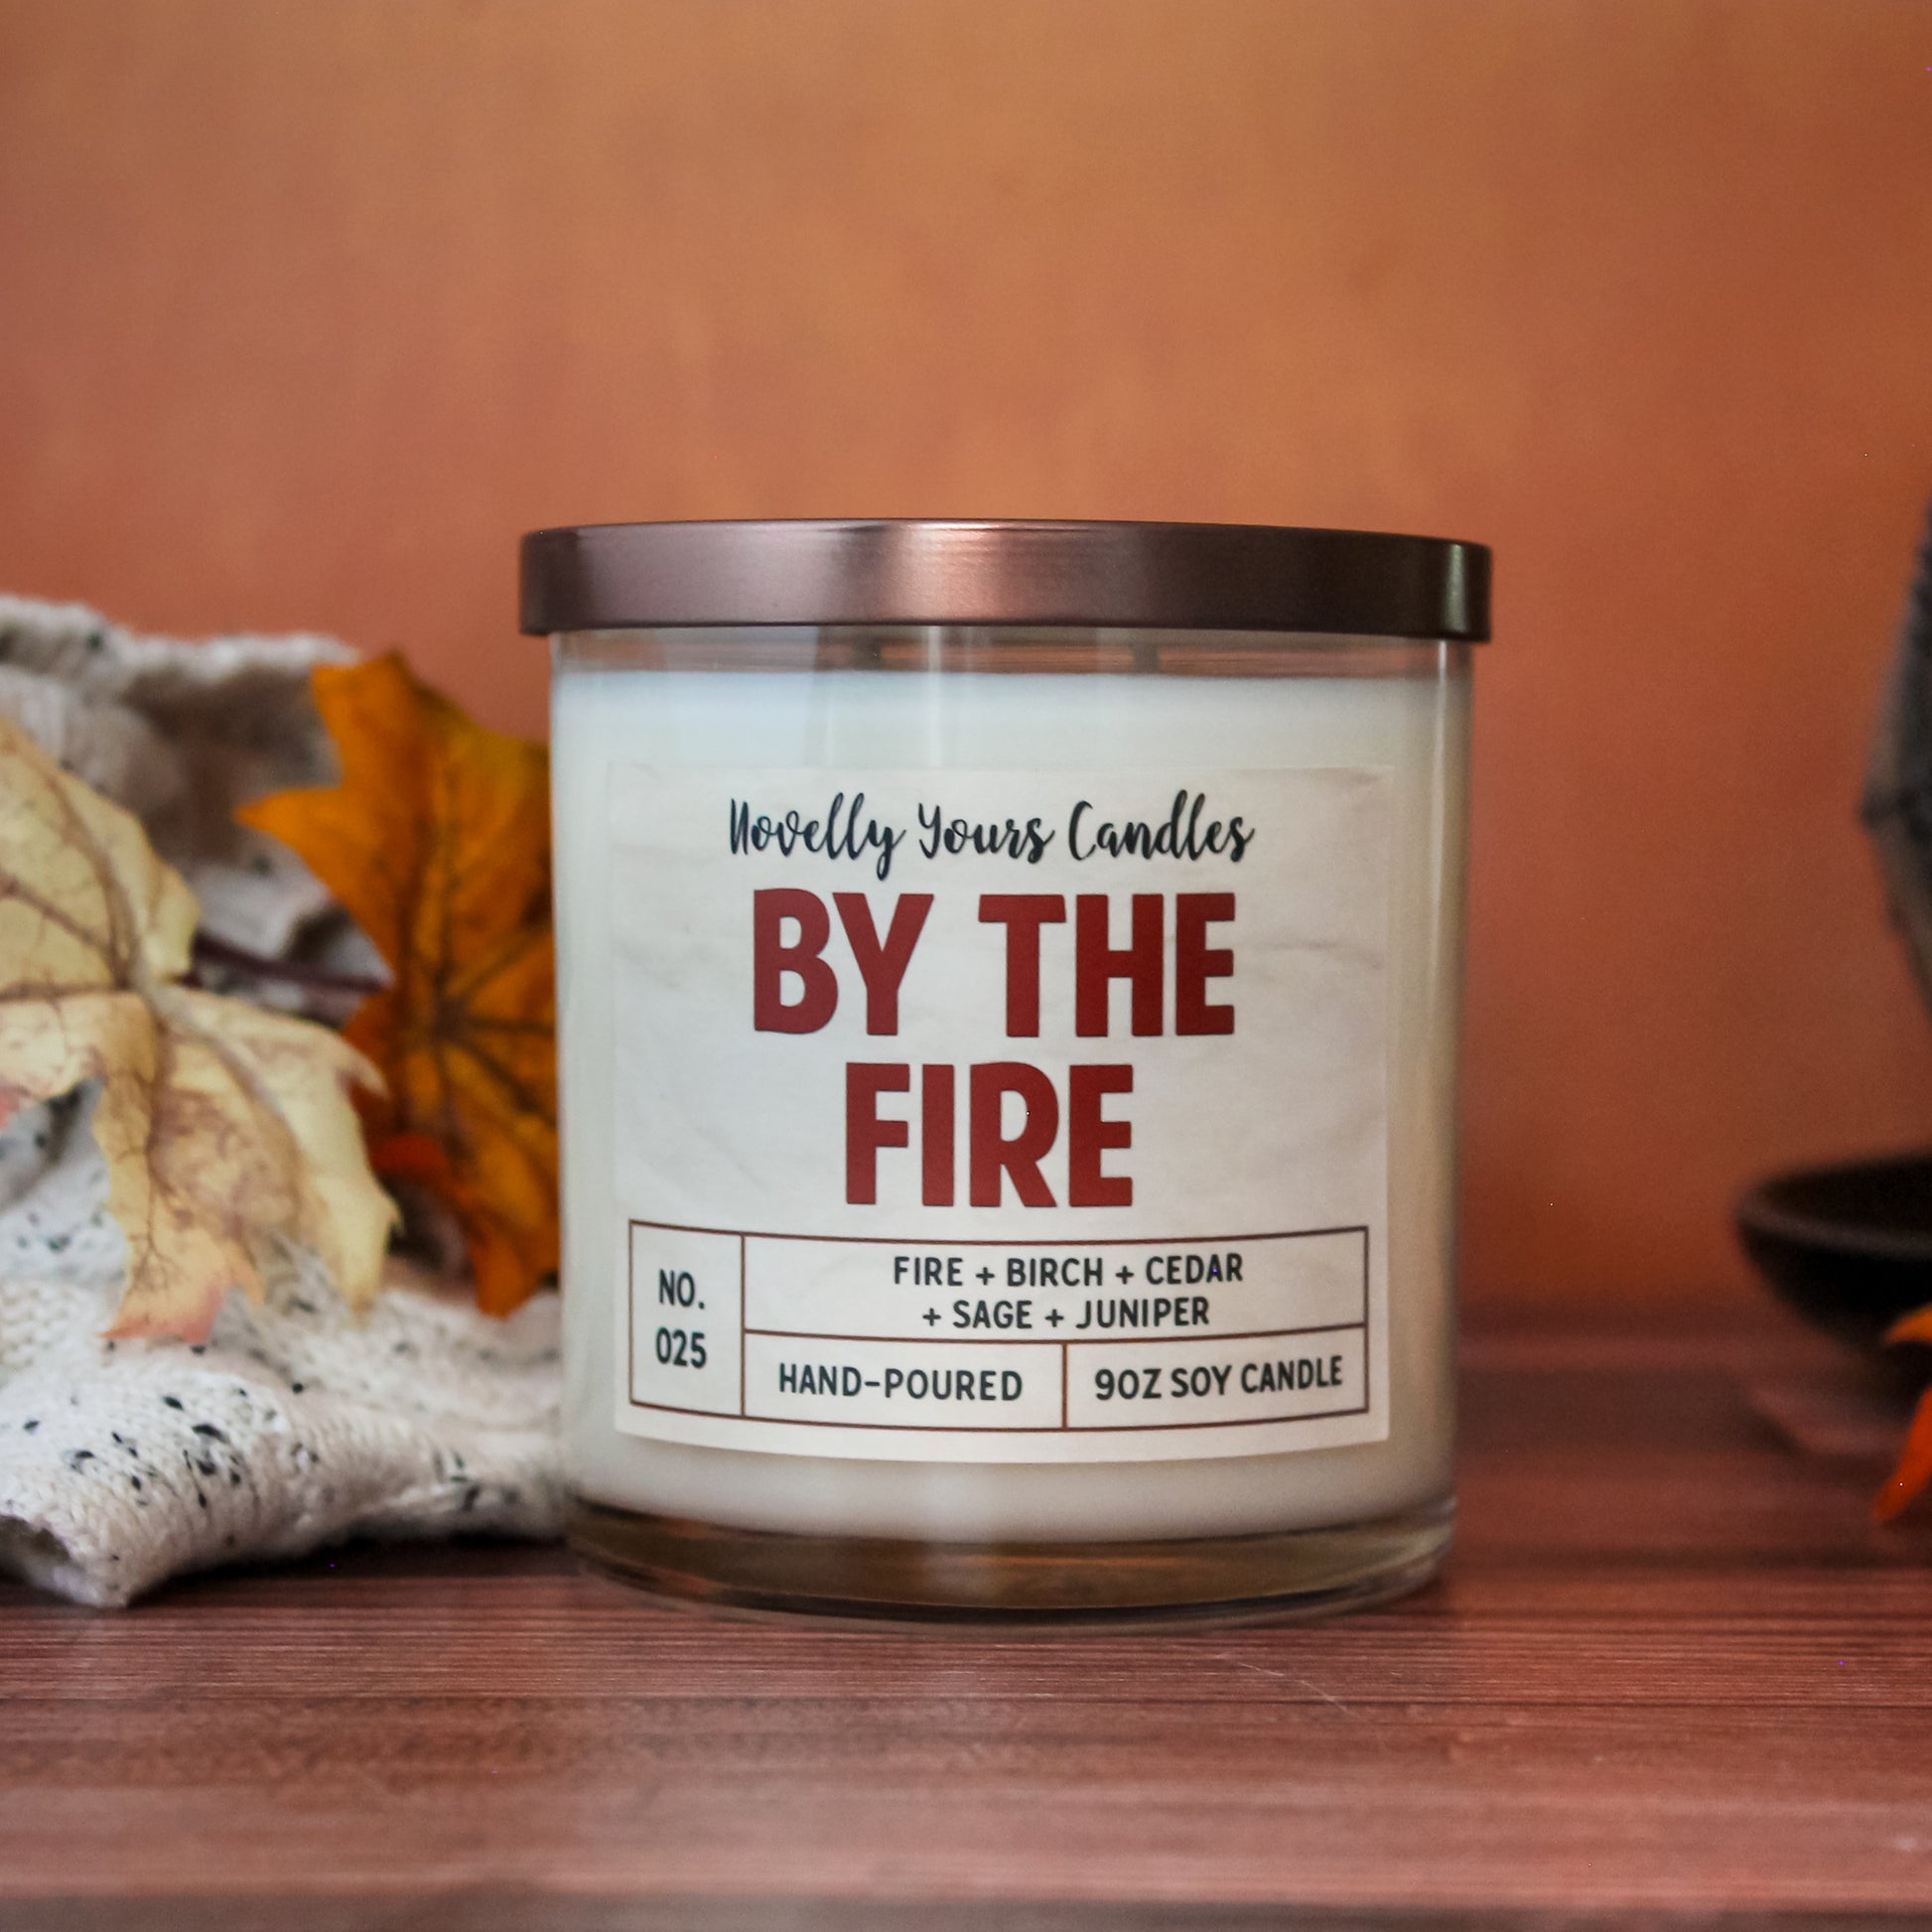 by the fire scented soy wax candle in glass tumbler and bronze lid. Sits on wooden surface with orange background